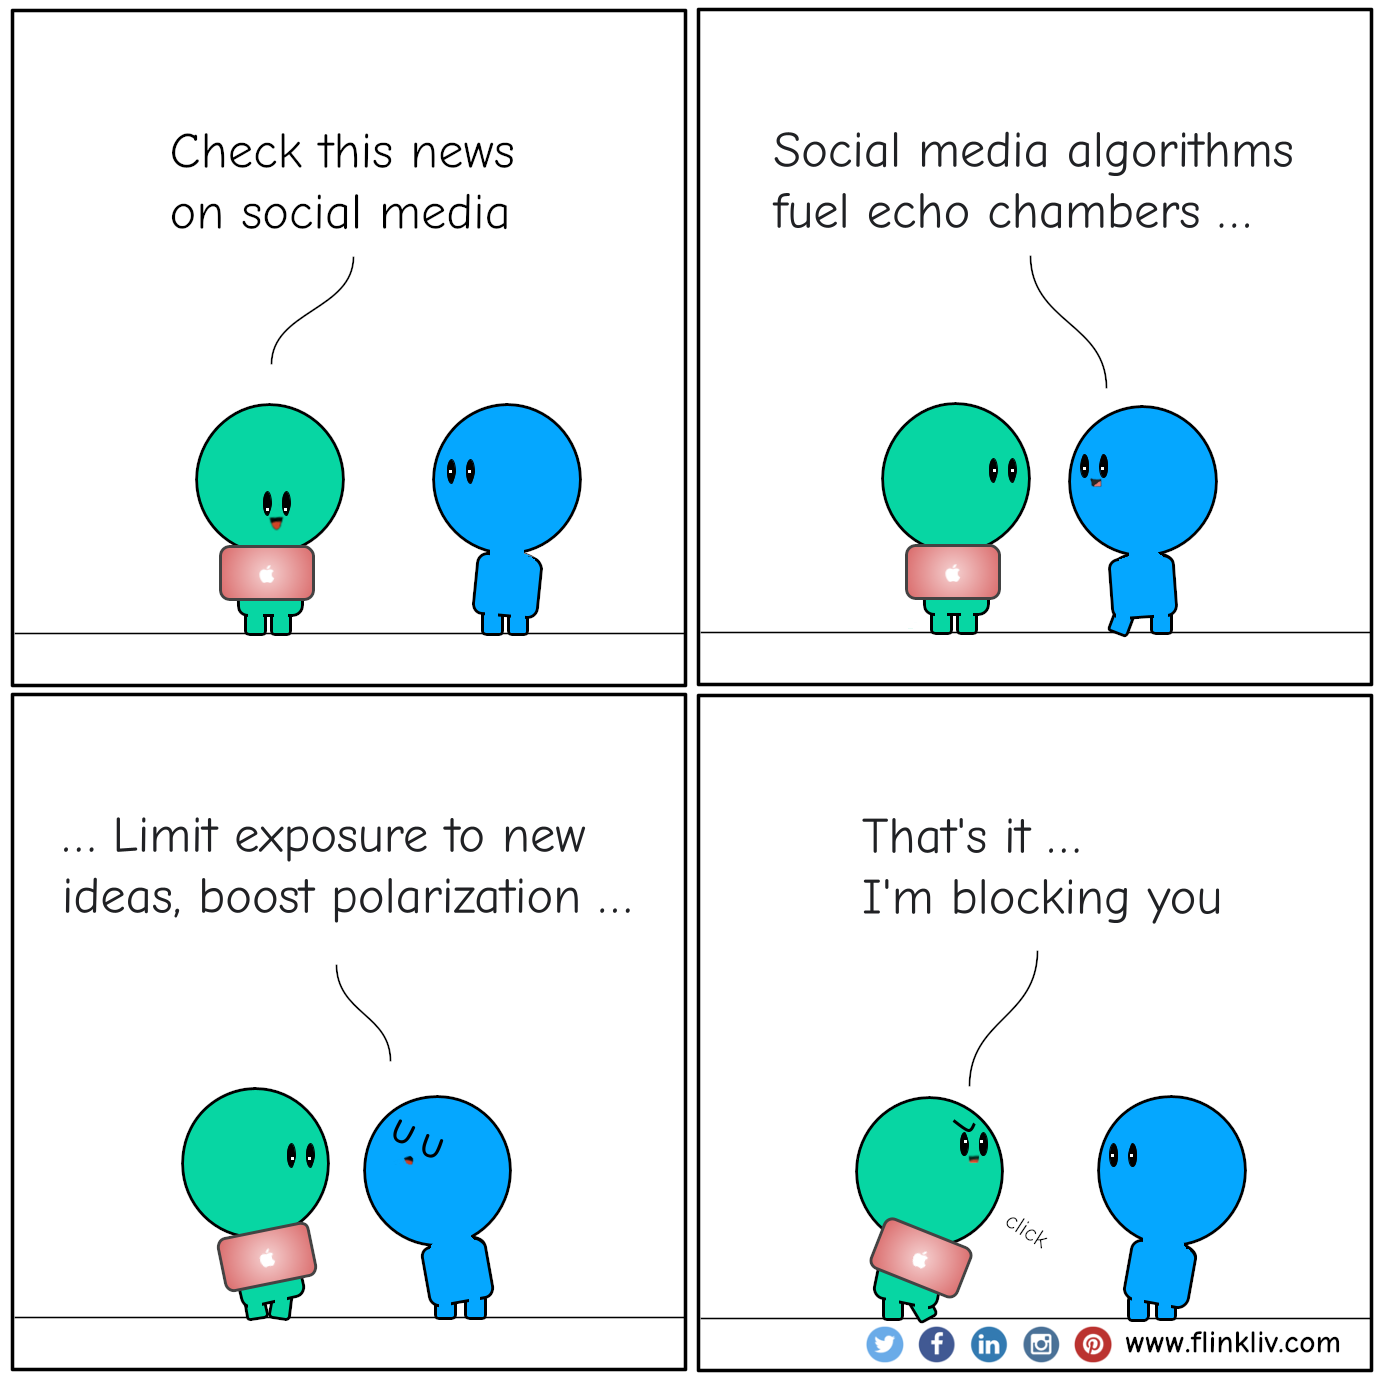 Conversation between A and B about echo chamber.
            A: Check this news on social media.
            B: Algorithms will feed & link you with info & people that reflect & reinforce your opinions.
            B: it is called the Echo chamber as it limits your exposure to different thoughts.
            B: Echo chamber increases social and political polarization.
            A: I unfriend you (click).
              